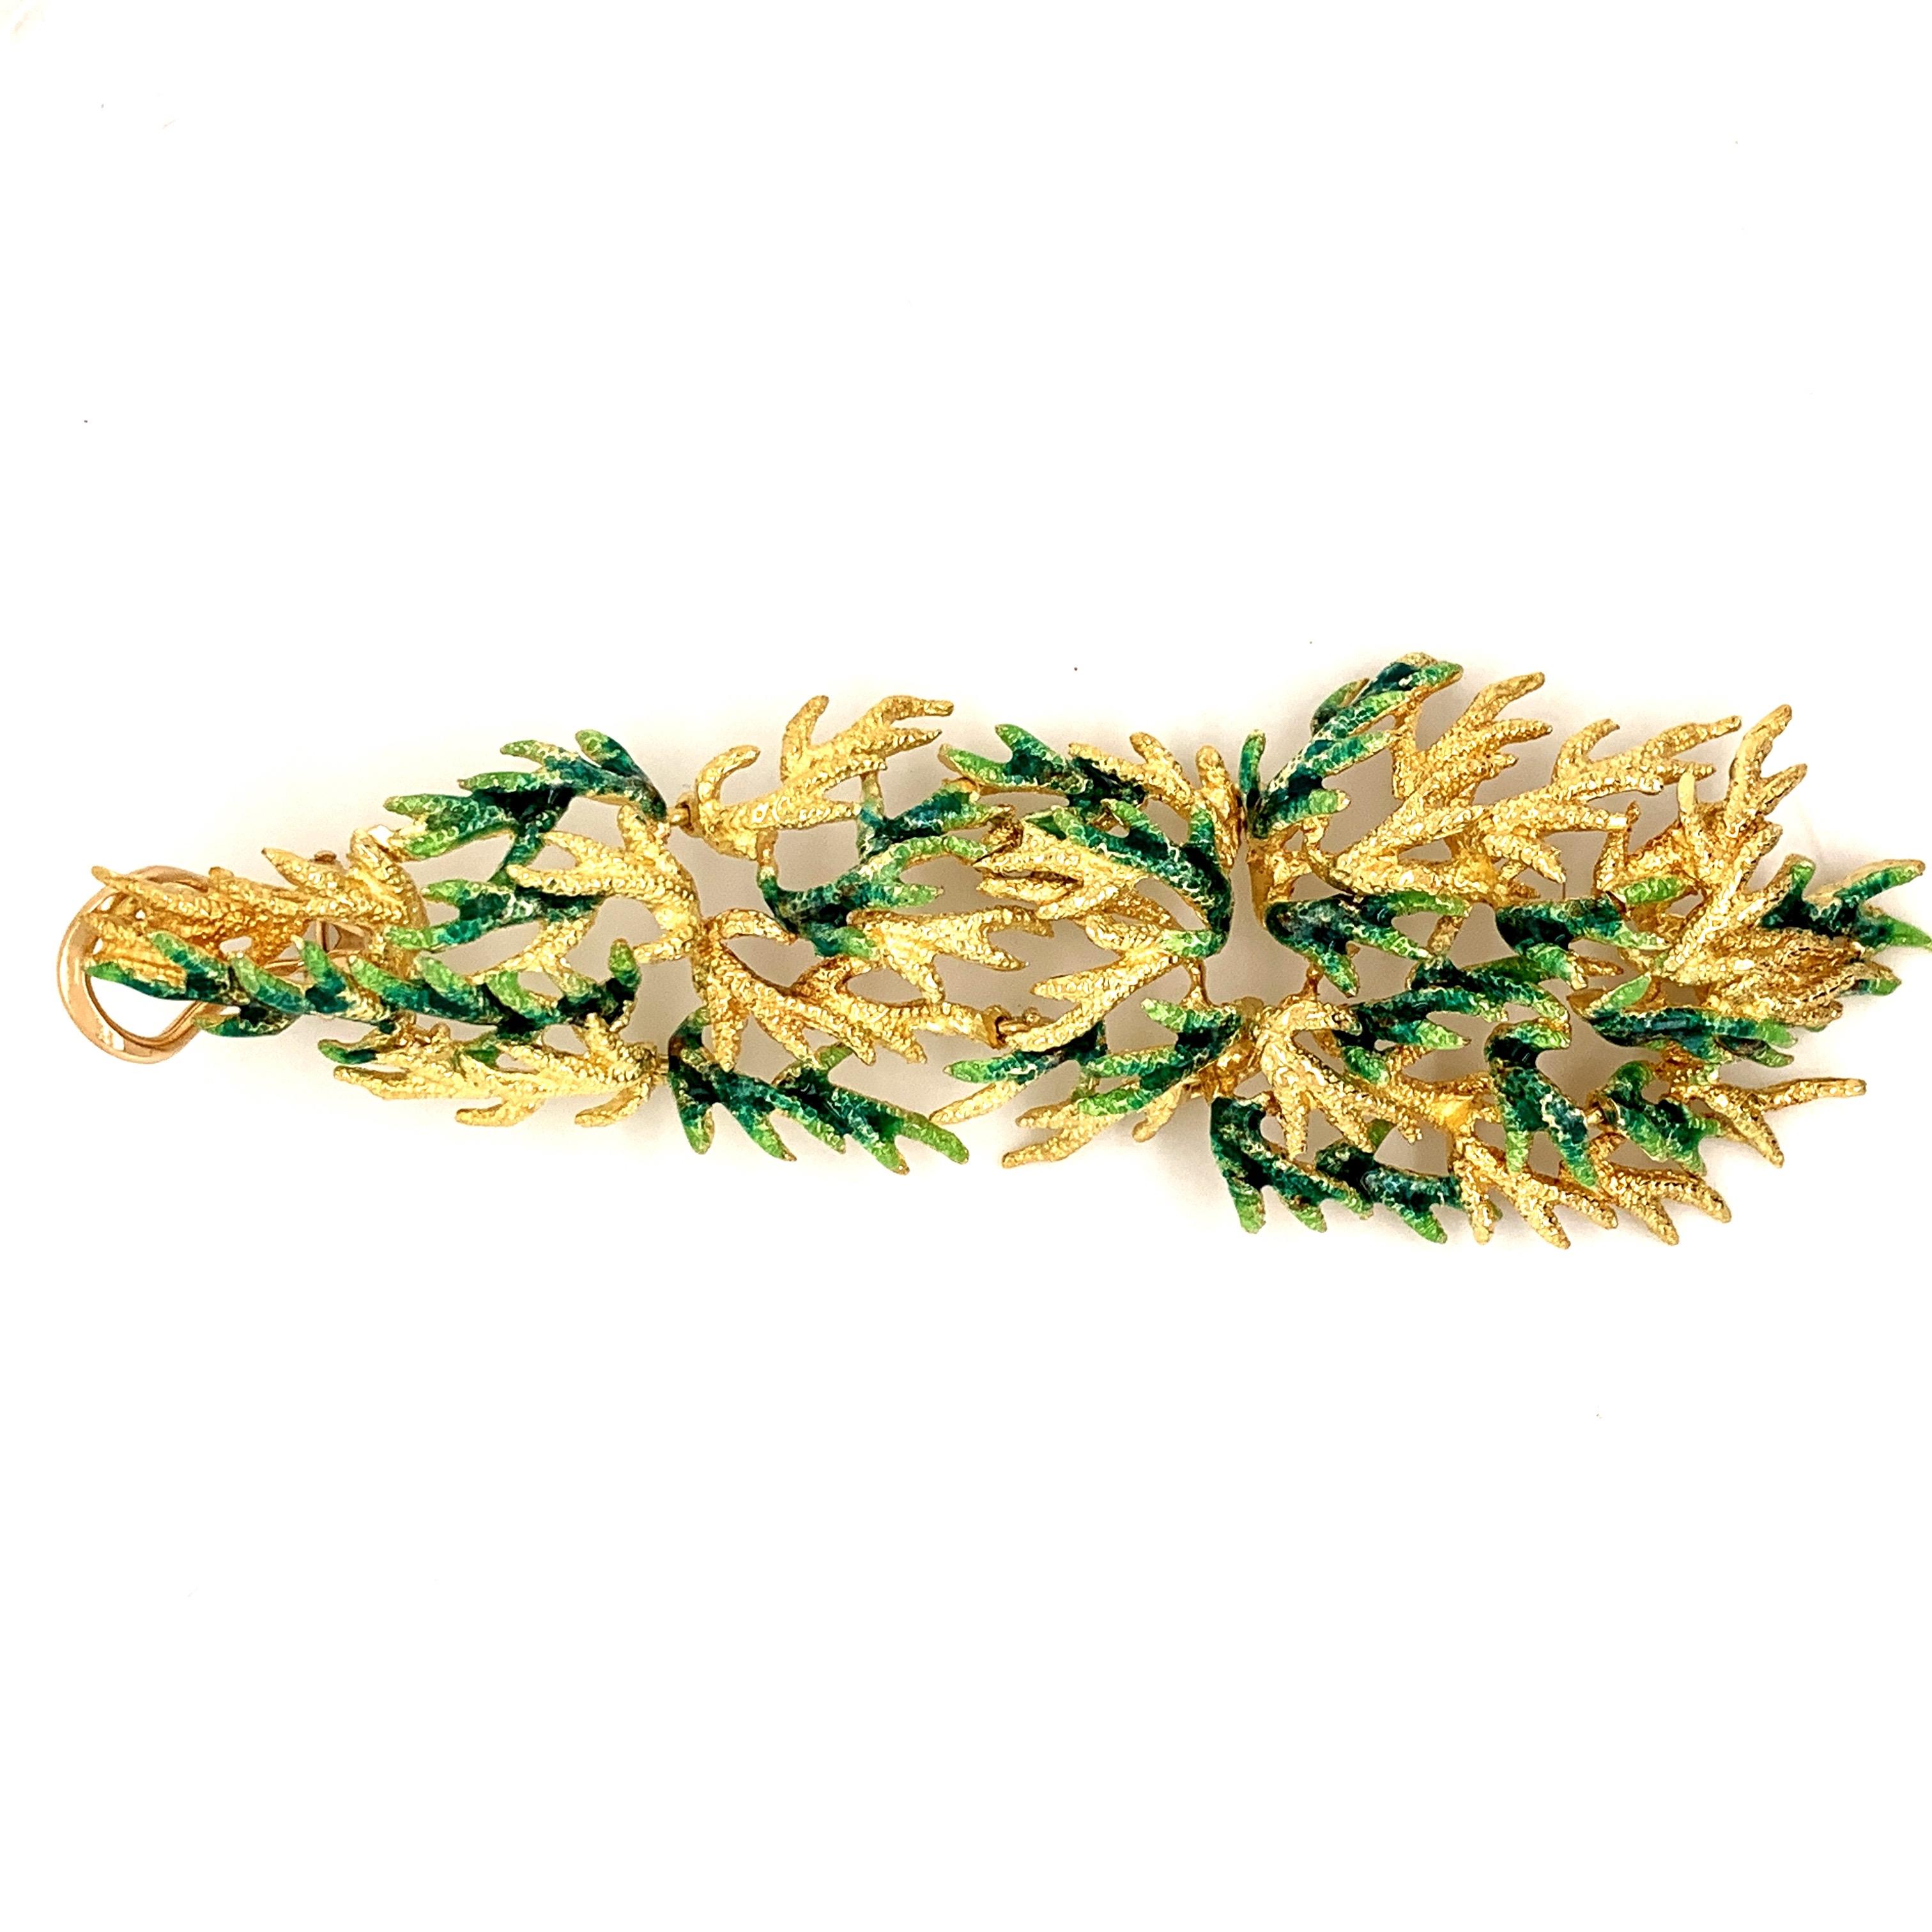 This lovely pair of 18k Gold and enamel drop earrings resemble that of a “pine tree leaf”.
Its intricate and detailed craftsmanship and light weight design allows for fluid movement thus truly resembling the natural motion of a “leaf” swaying in the